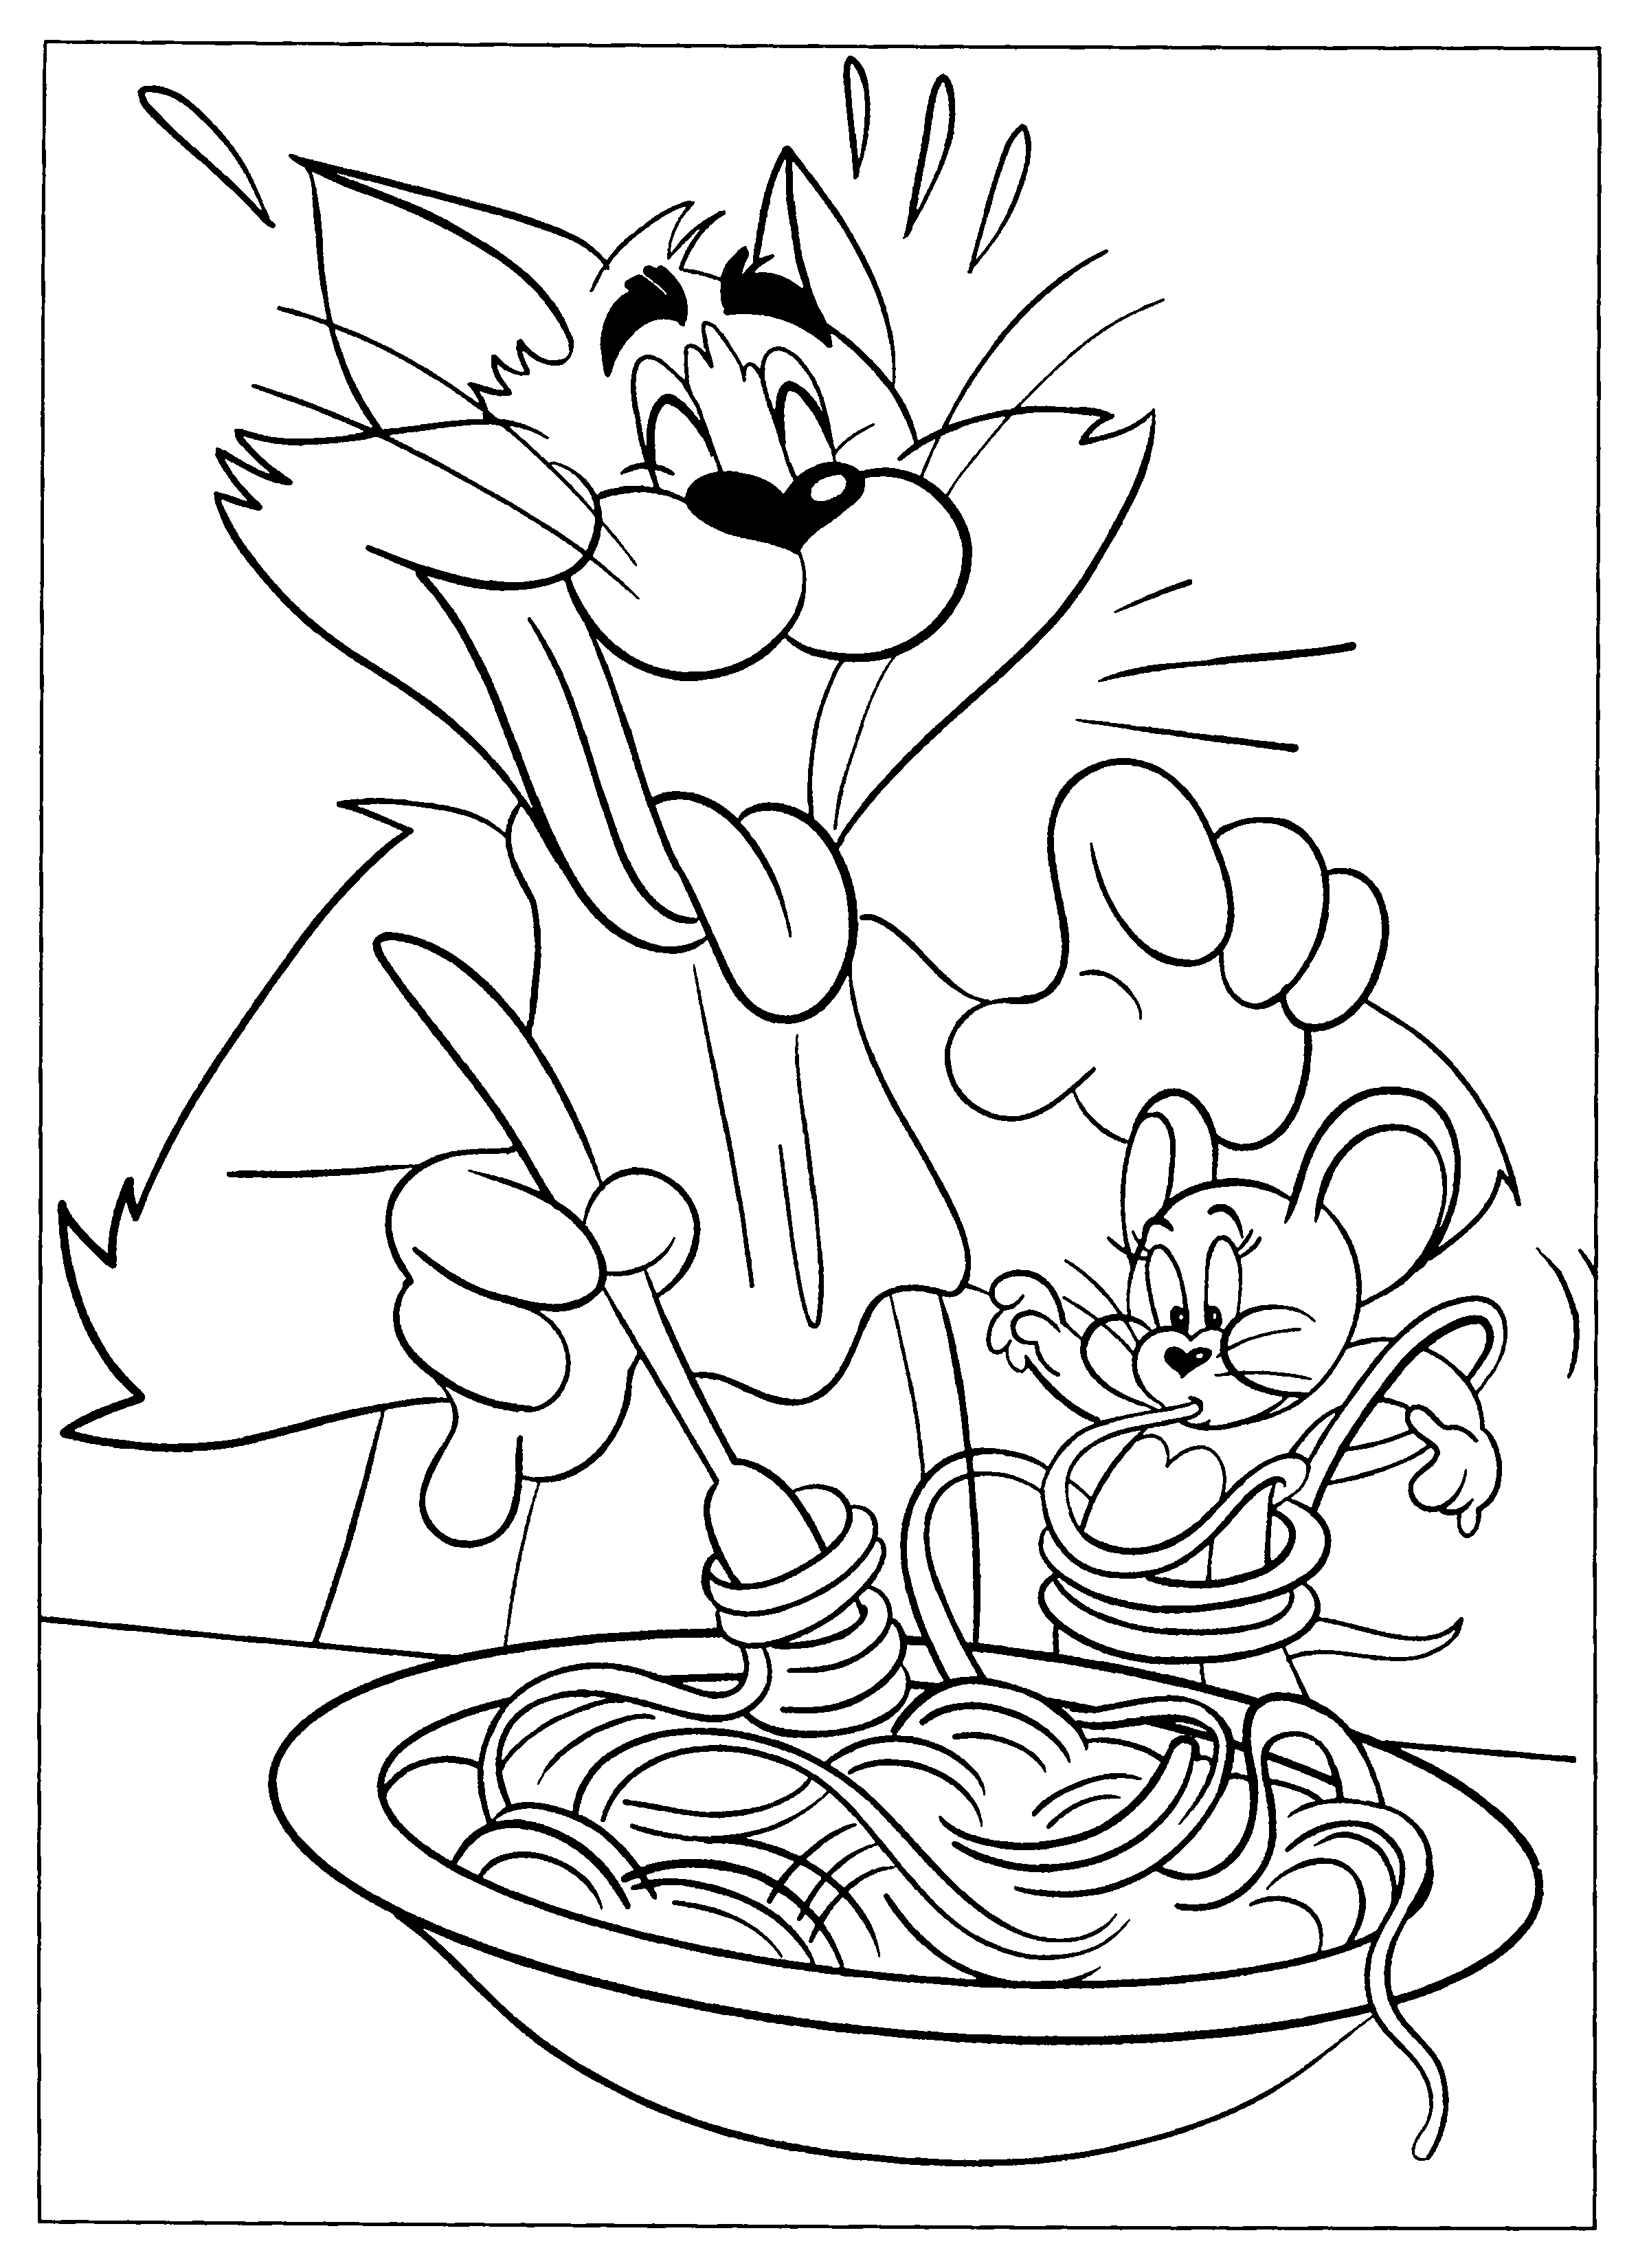 Tom and jerry Coloring Pages - Coloringpages1001.com